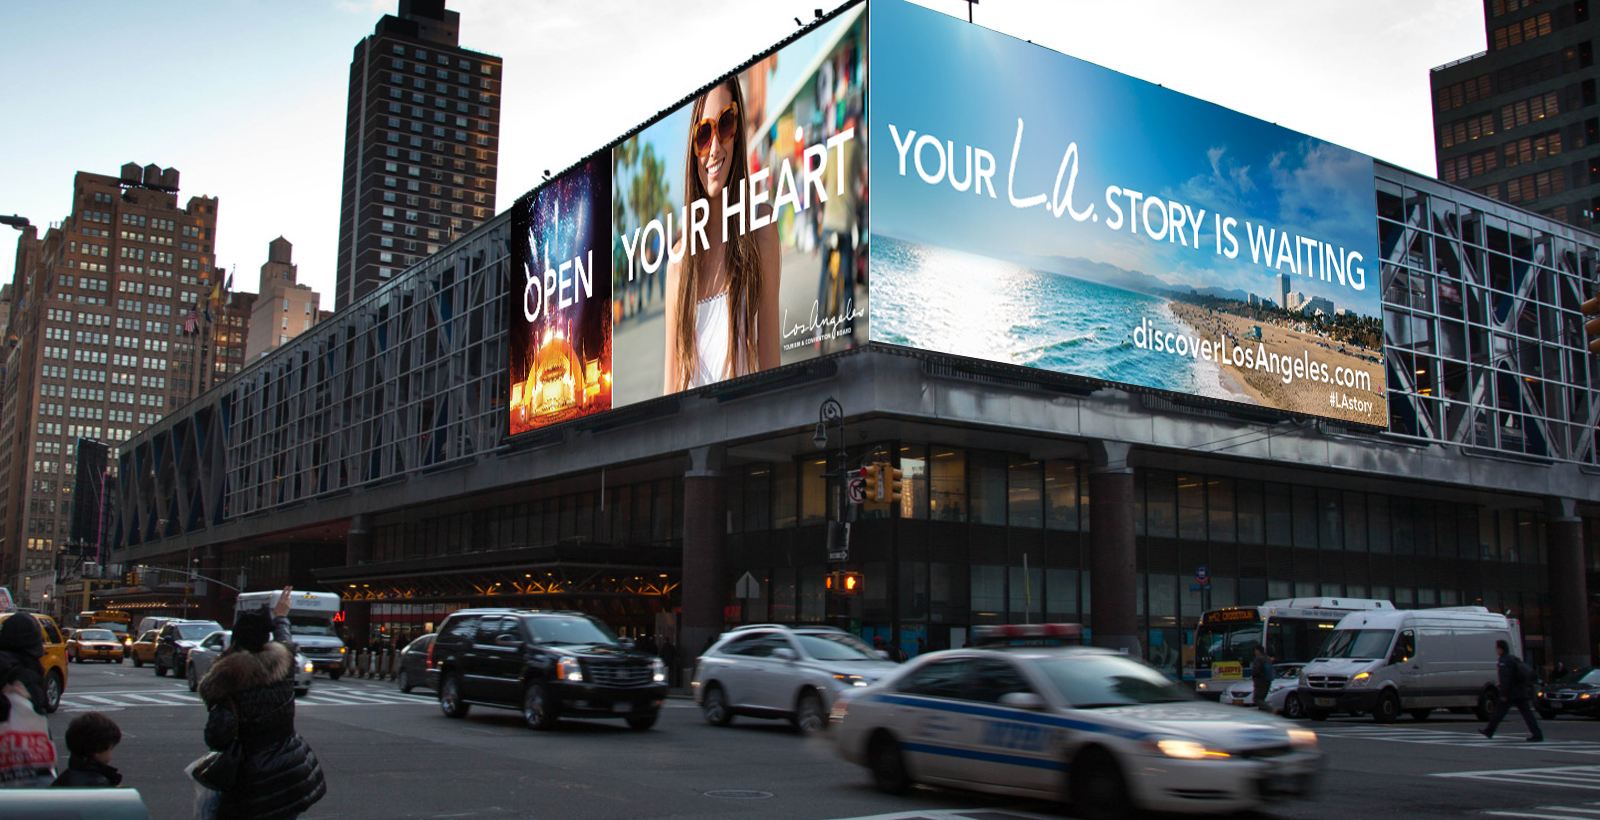 what's your LA story campaign billboard at NYC Port Authority building